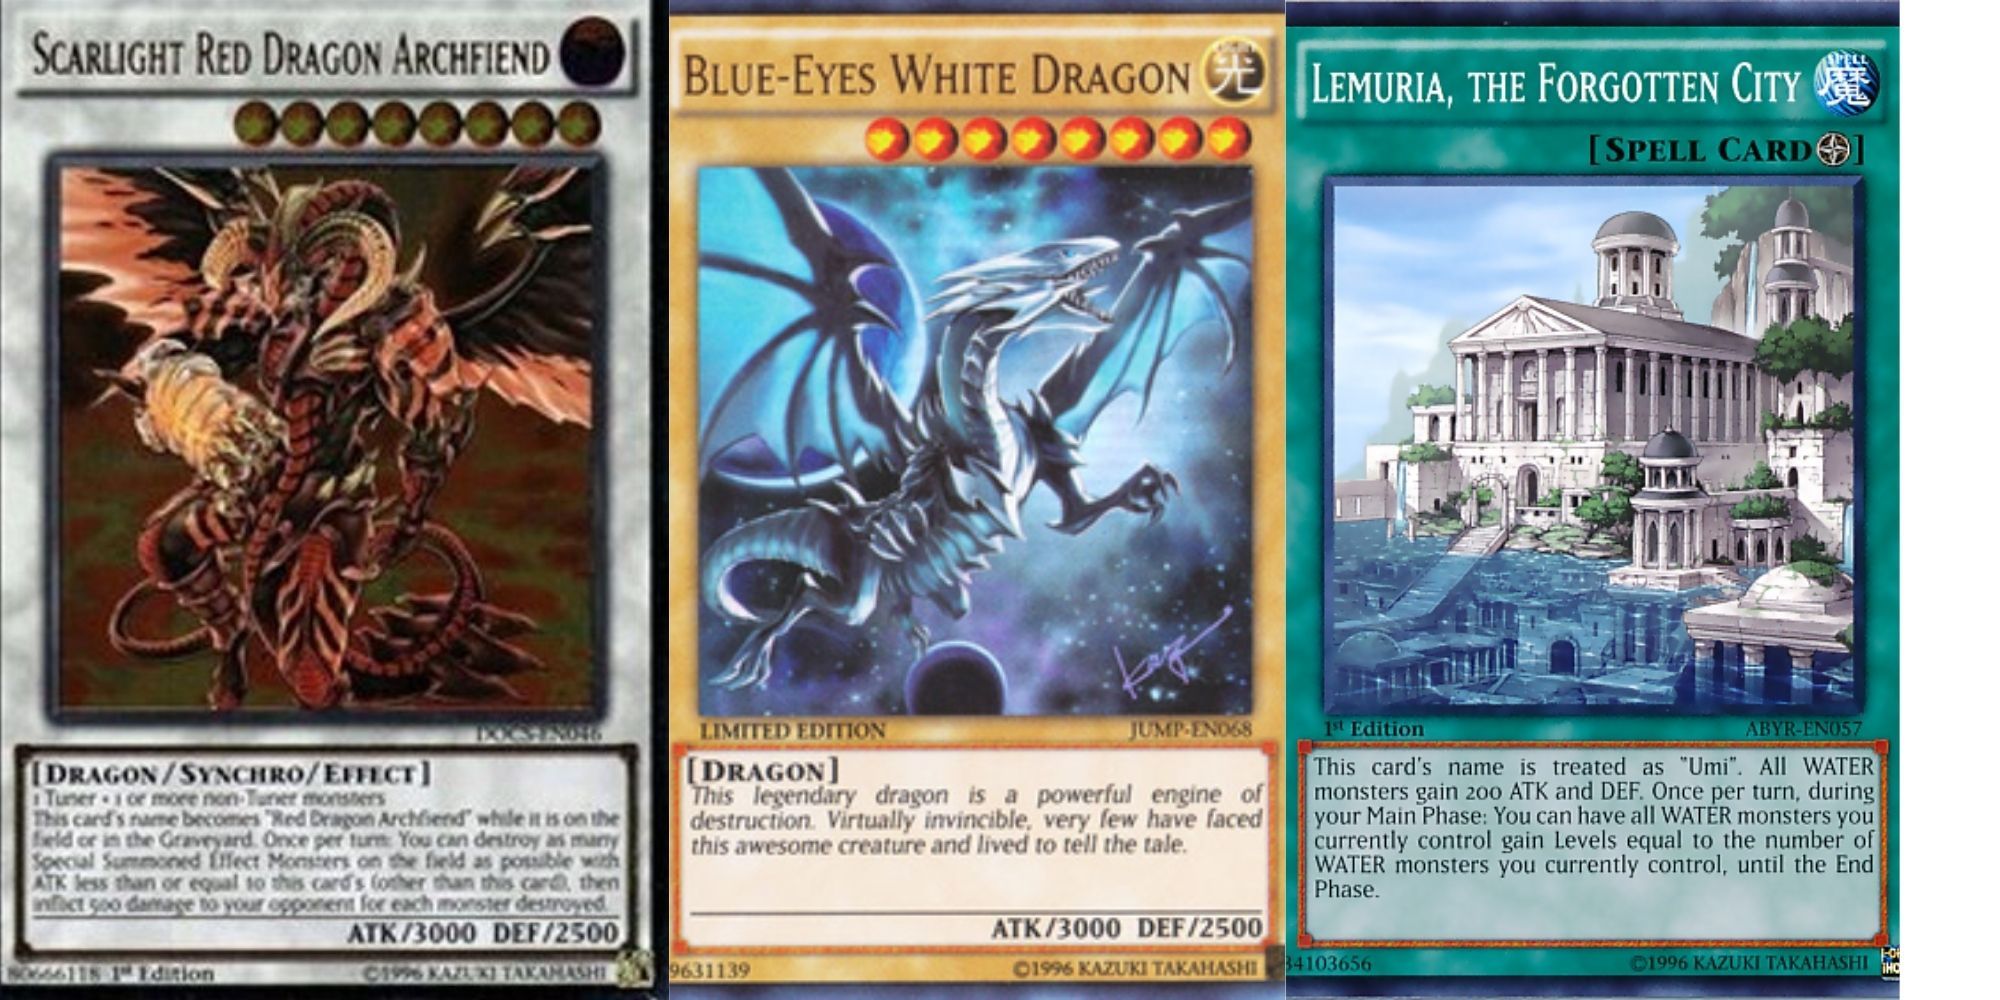 Split image of three Yu-Gi-Oh! cards: Scarlight Red Dragon Archfiend, Blue-Eyes White Dragon and Lemuria, The Forgotten City